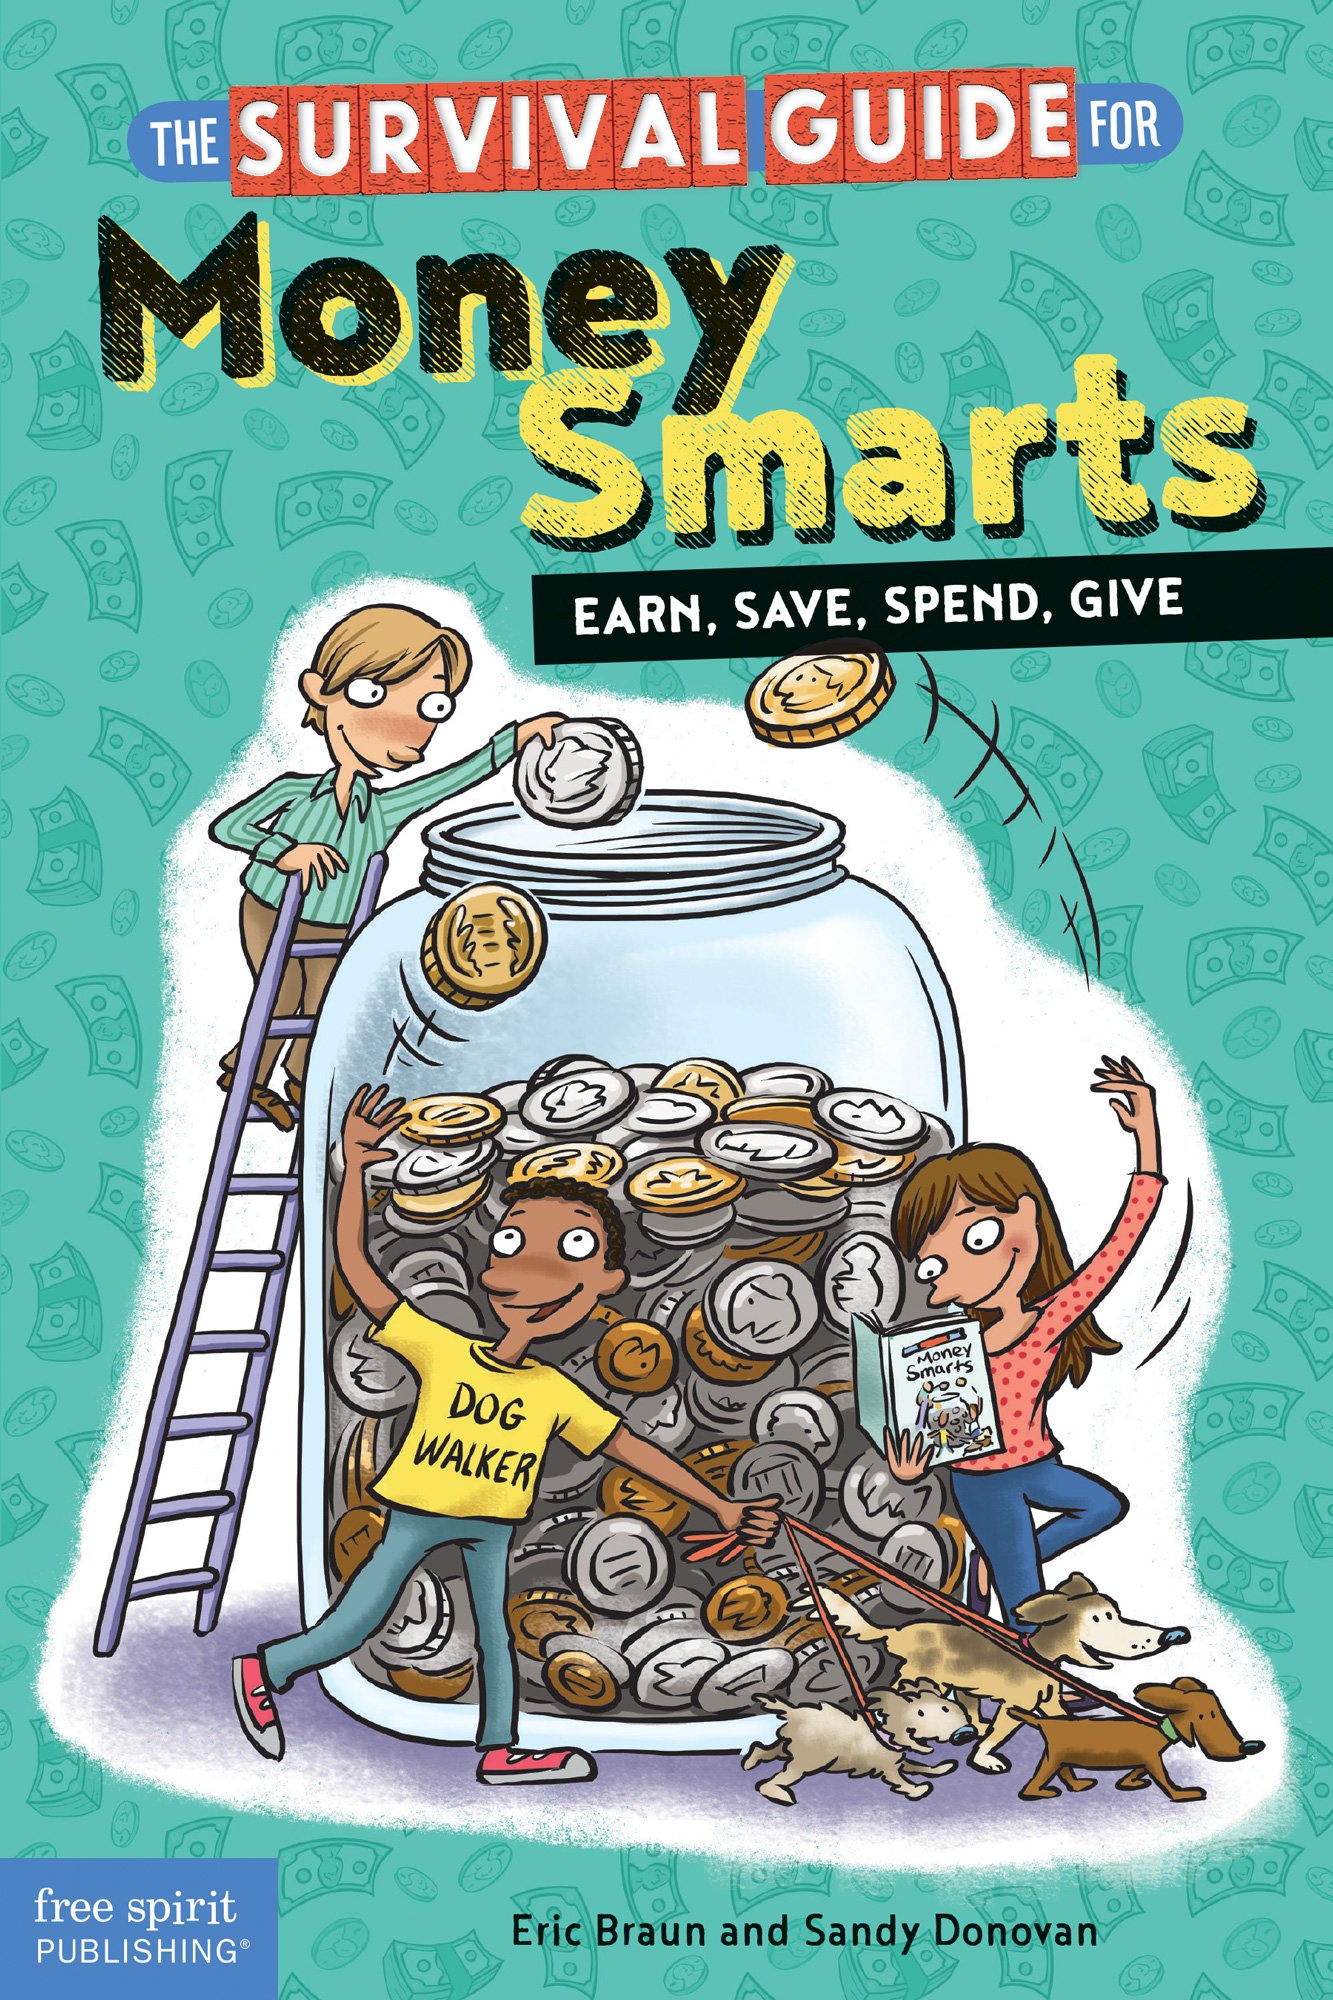 The cover of the book "The Survival Guide for Money Smarts" features a large cartoon jar of coins. One boy has climbed a ladder to place a coin inside, a girl reads a mini version of the book while tossing in a coin, and another boy waves as he walks by three dogs on leashes. 